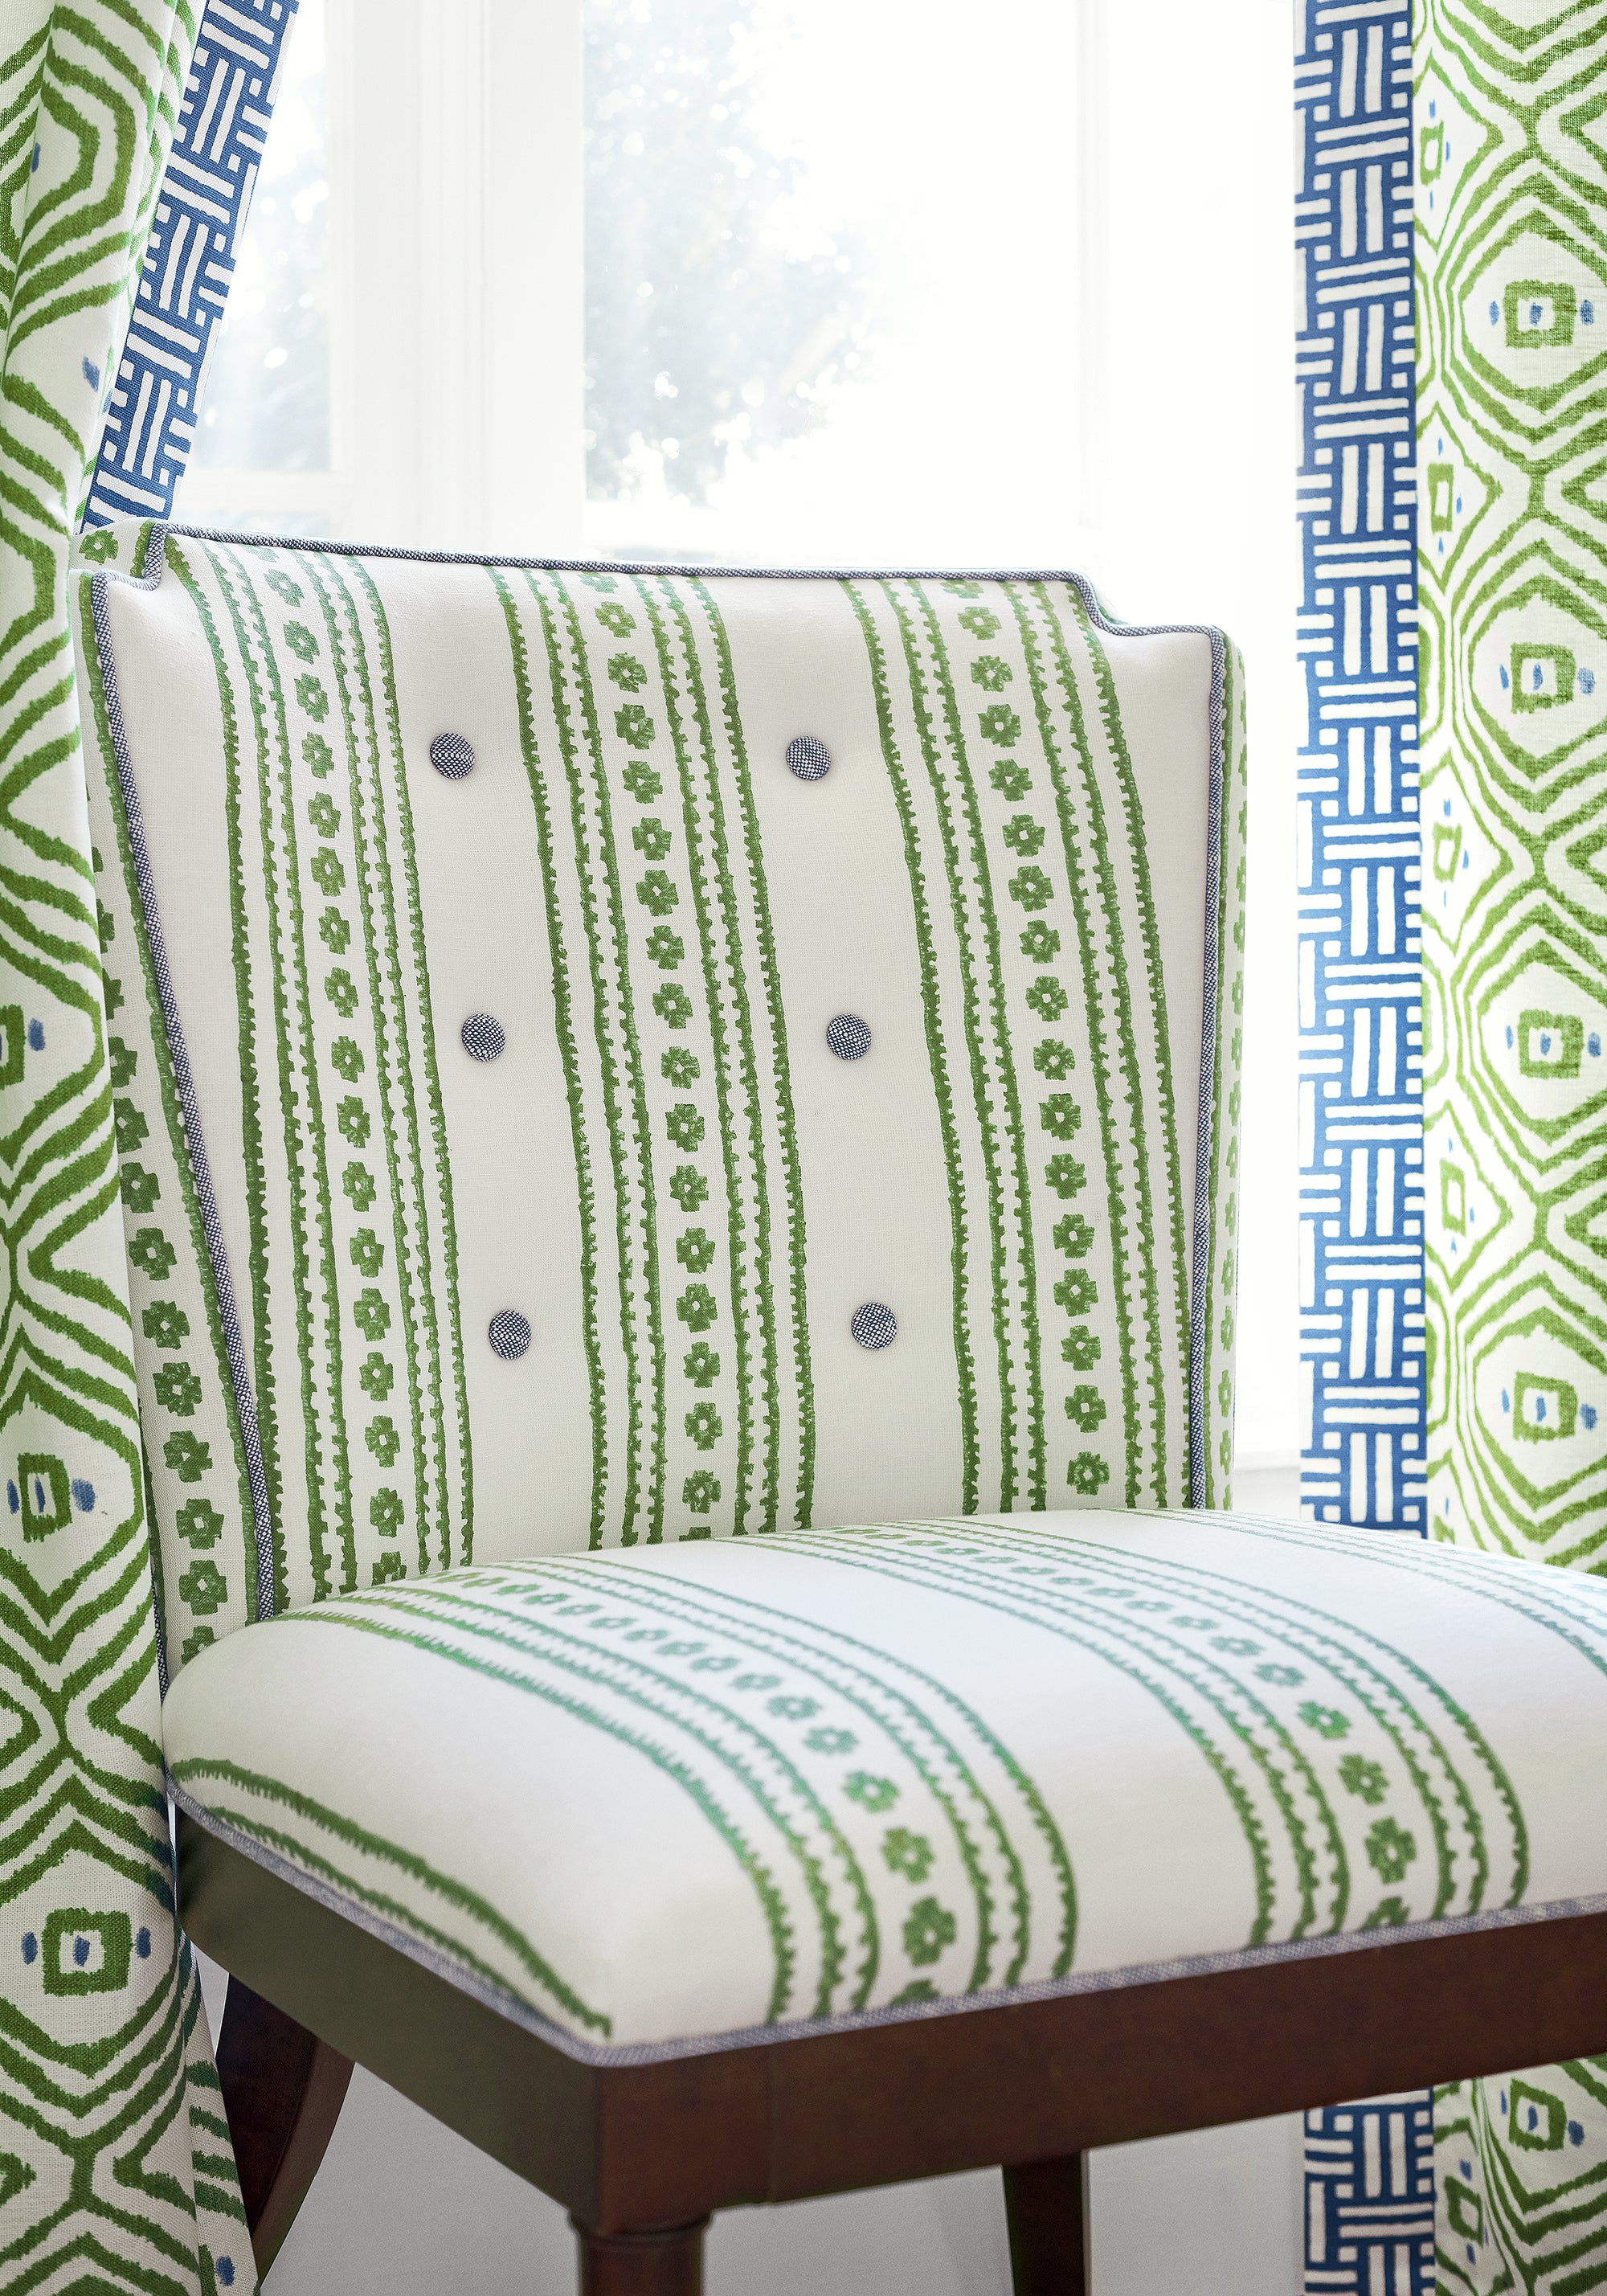 Stirling dining chair upholstered in Thibaut new haven stripe printed fabric in green color, pattern  number F910607